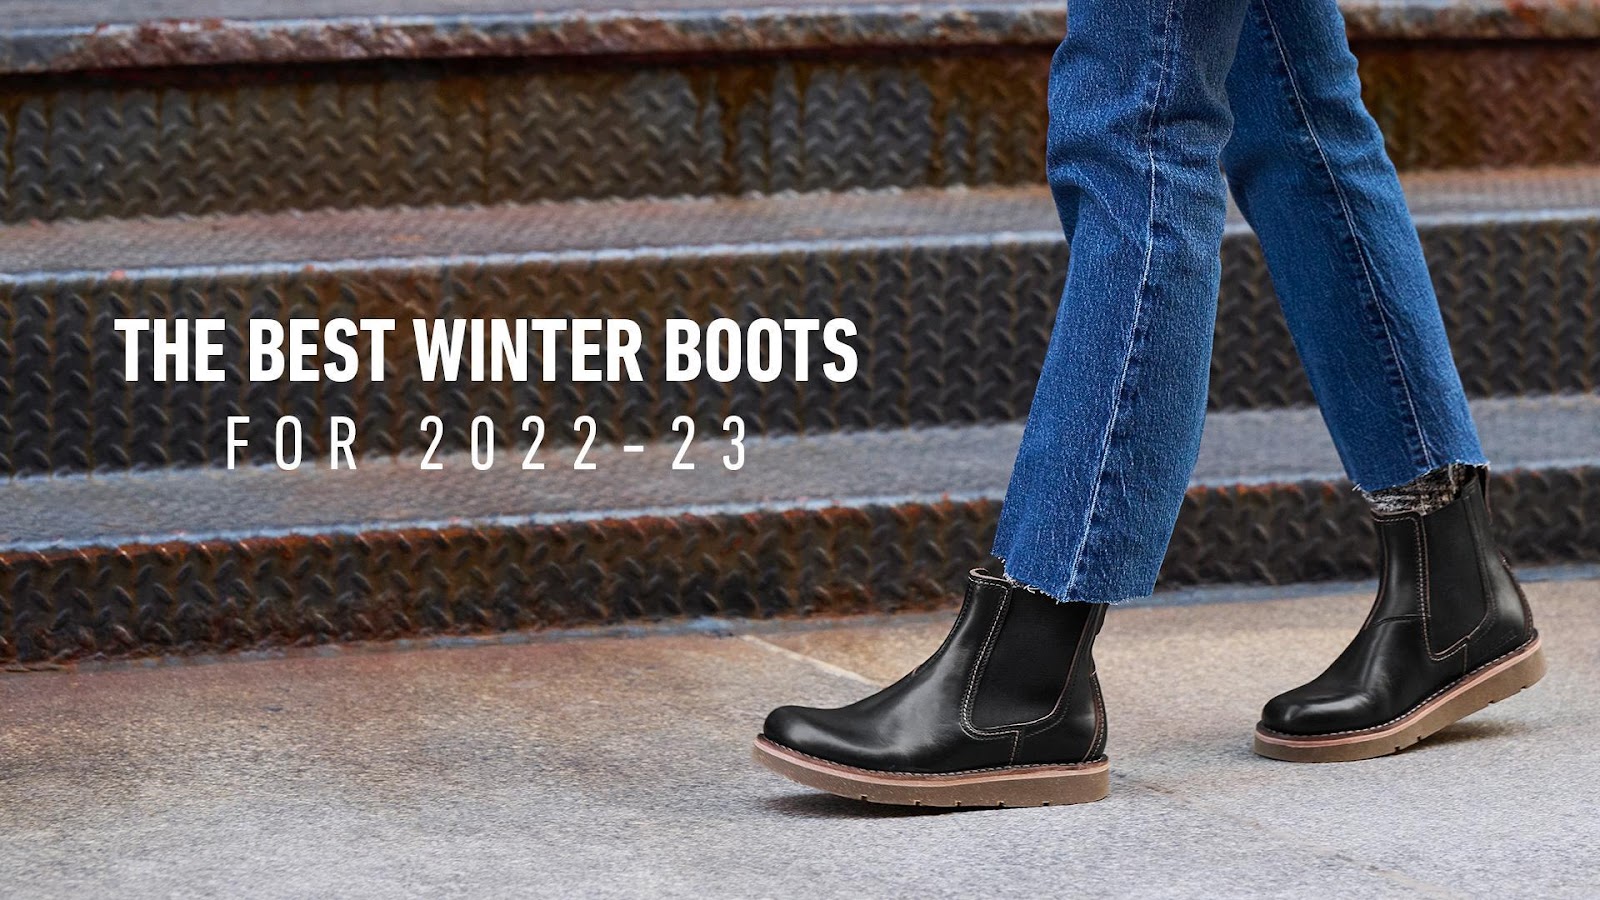 The Best Winter Boots For 2022-23